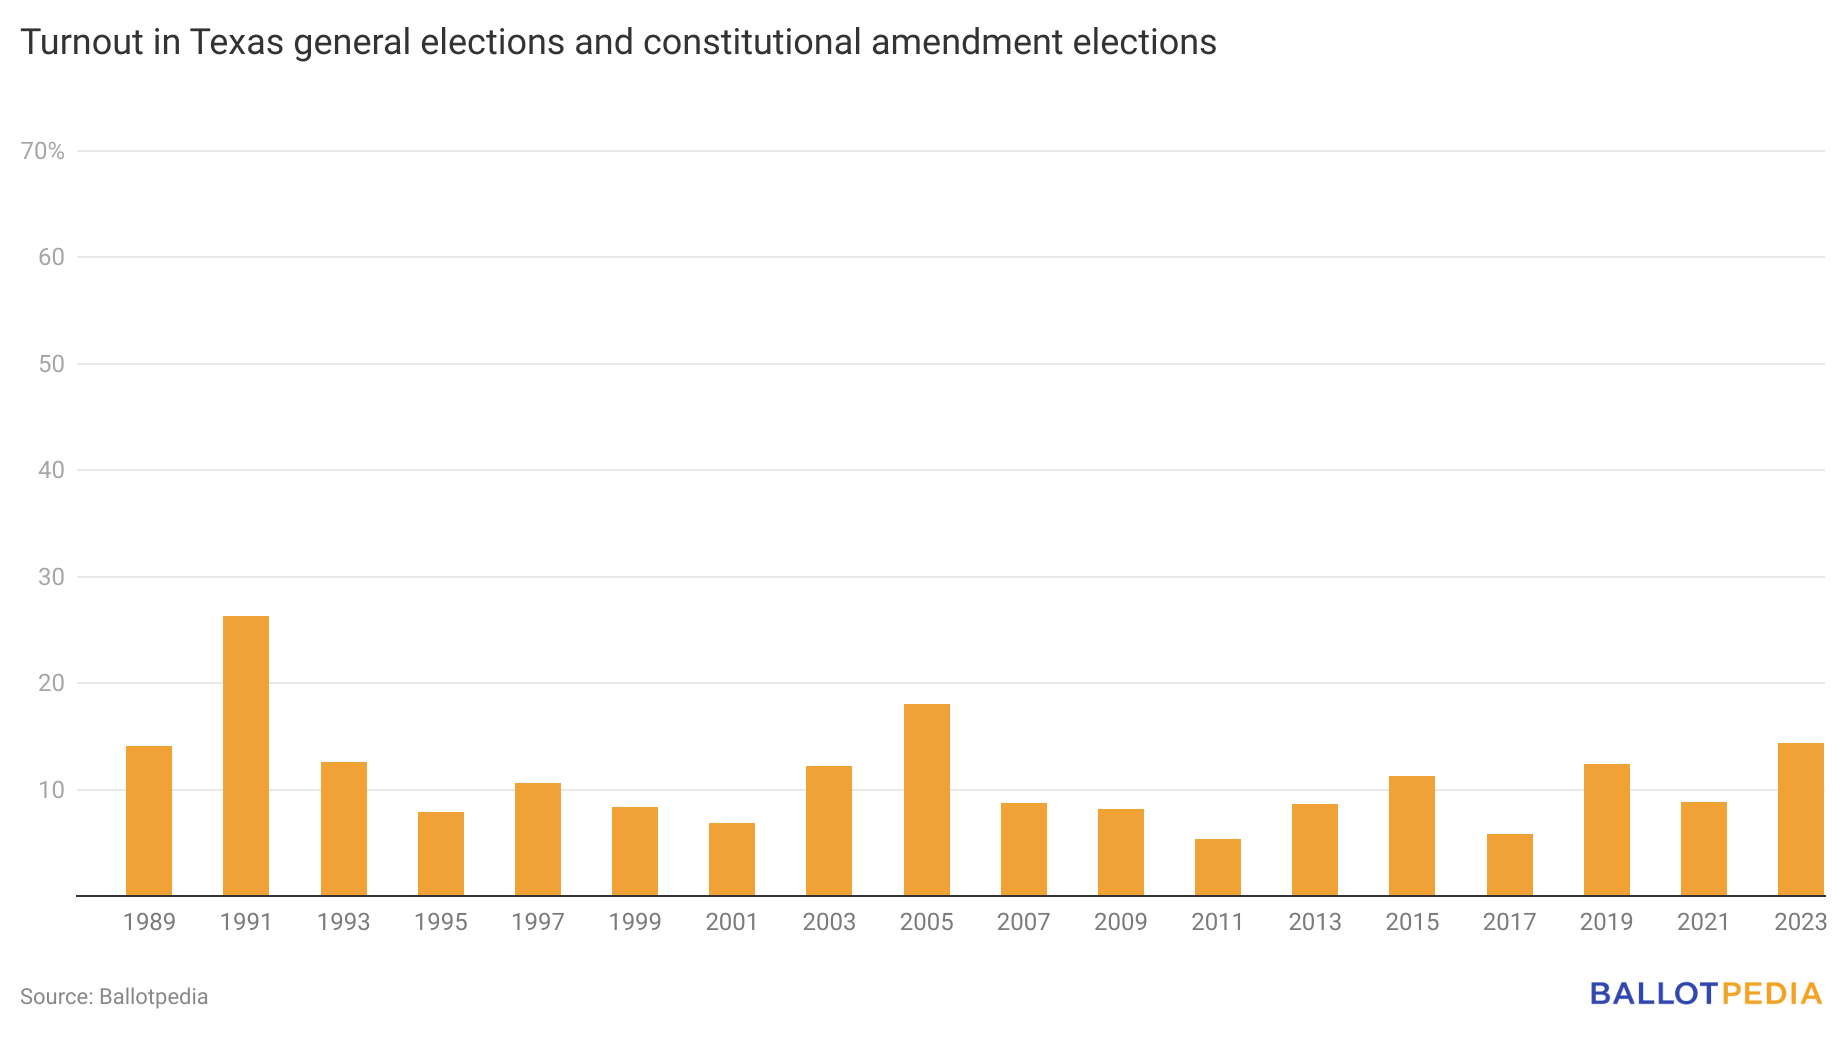 2023 highest oddyear constitutional amendment election turnout in